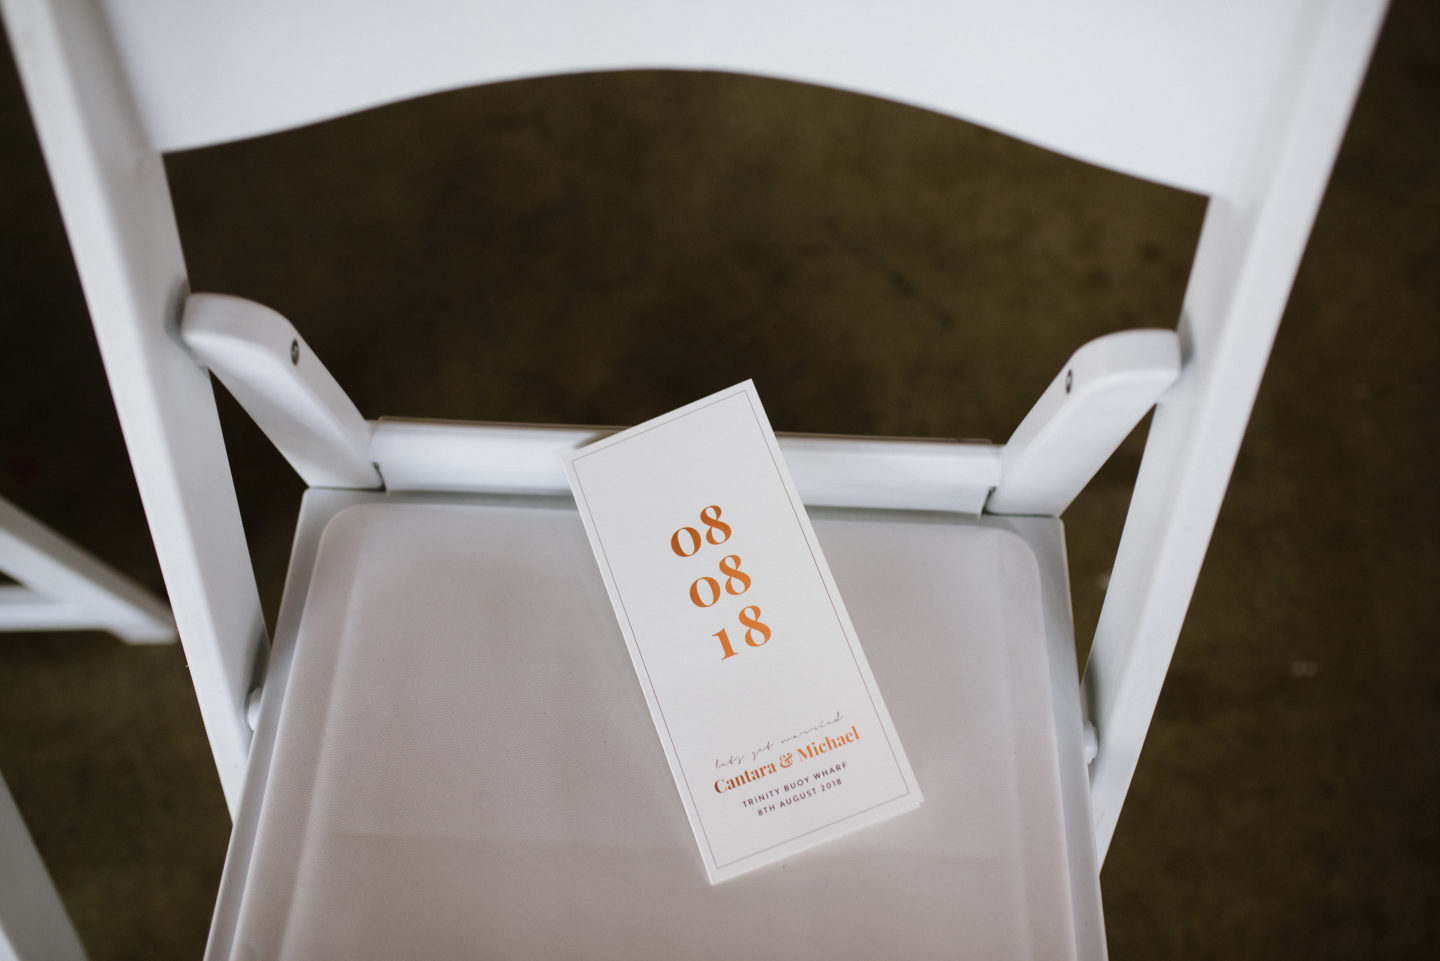 Wedding order of service booklet. A Modern, Industrial Warehouse Wedding with Personal Touches